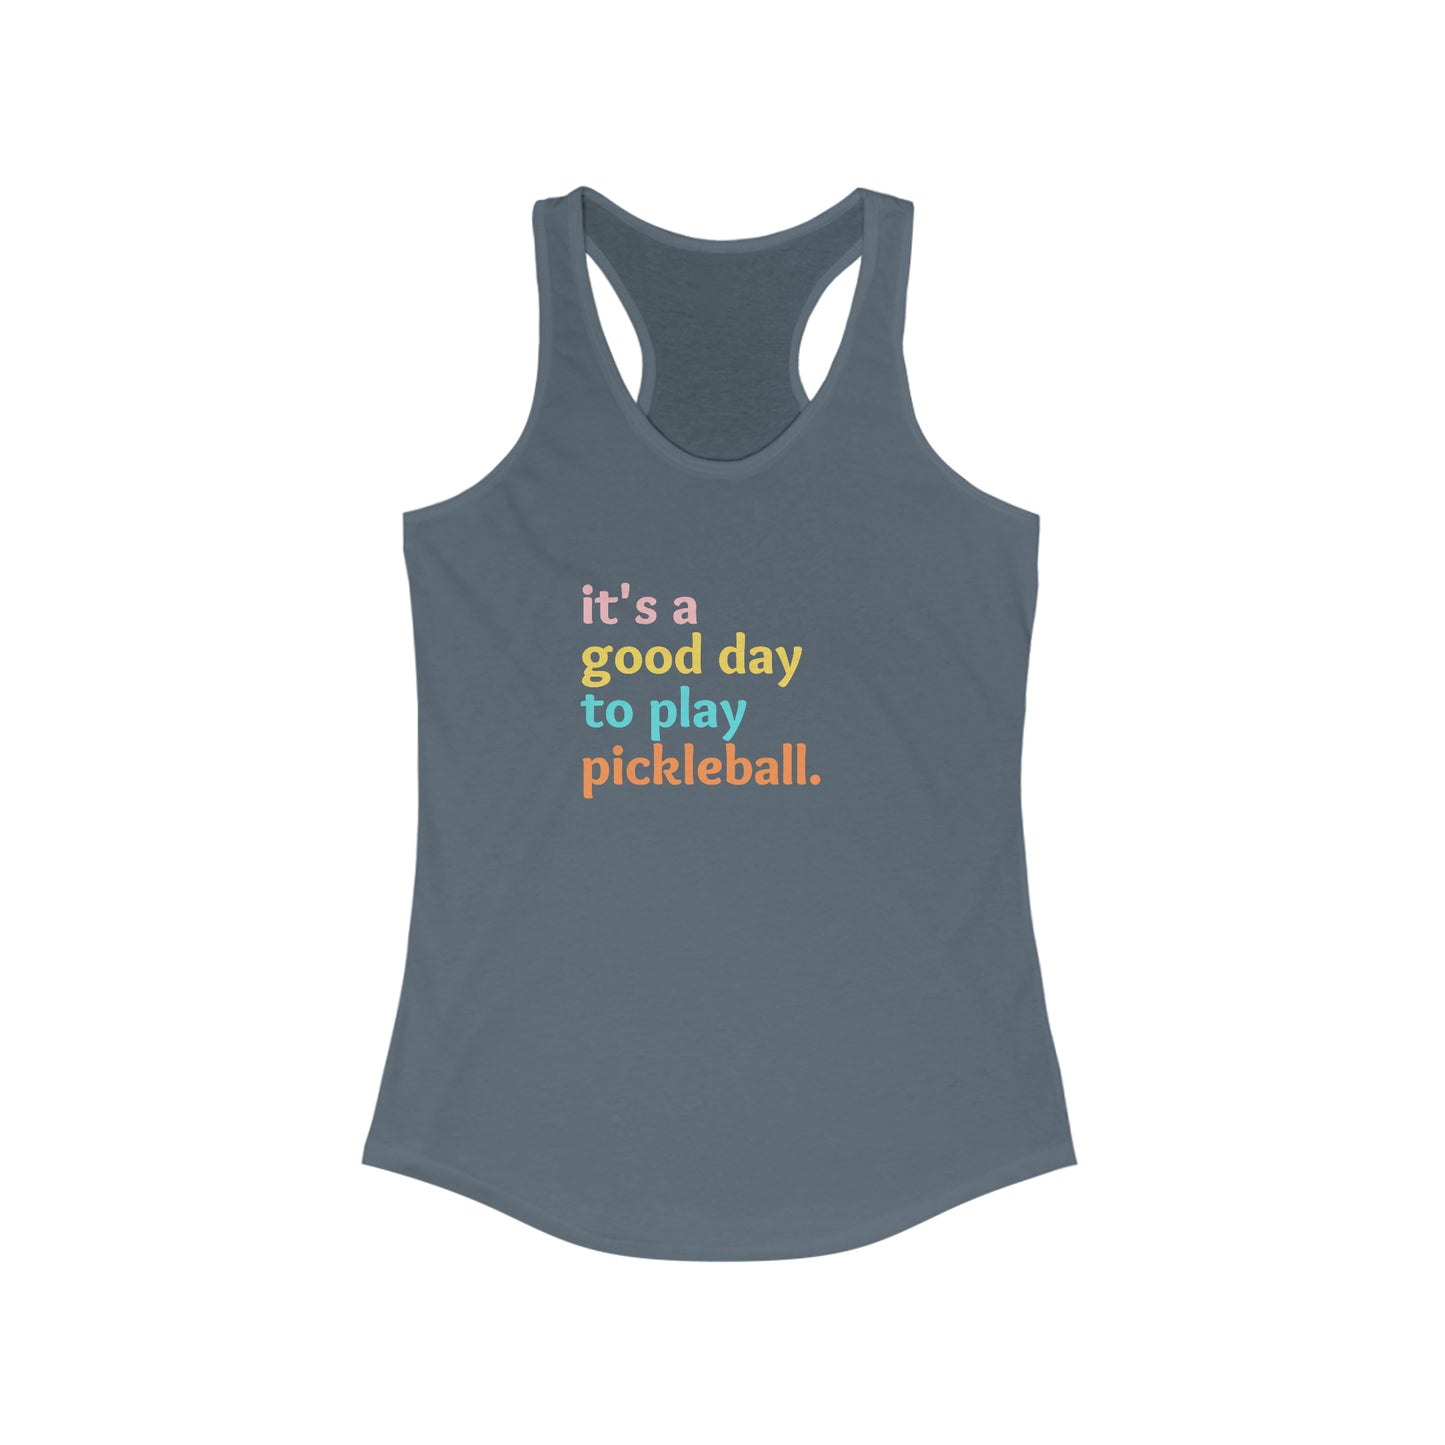 It's A Good Day To Play Pickleball. Women's Racerback Tank Top